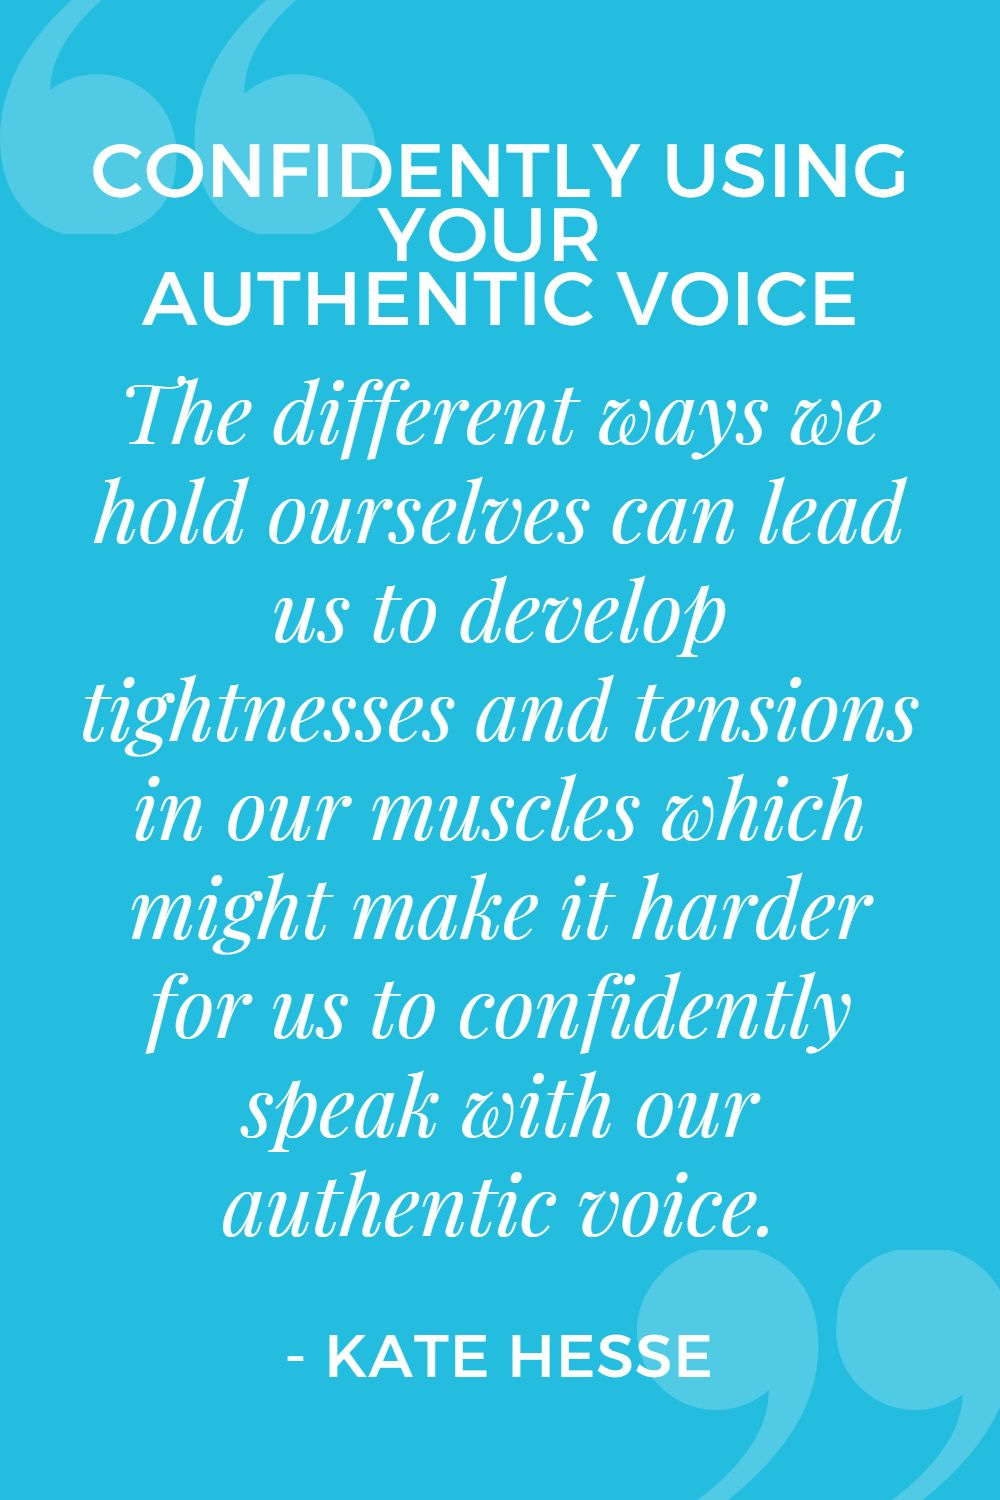 The different ways we hold ourselves can lead us to develop tightness and tensions in our muscles which might make it harder for us to confidently speak with our authentic voice.